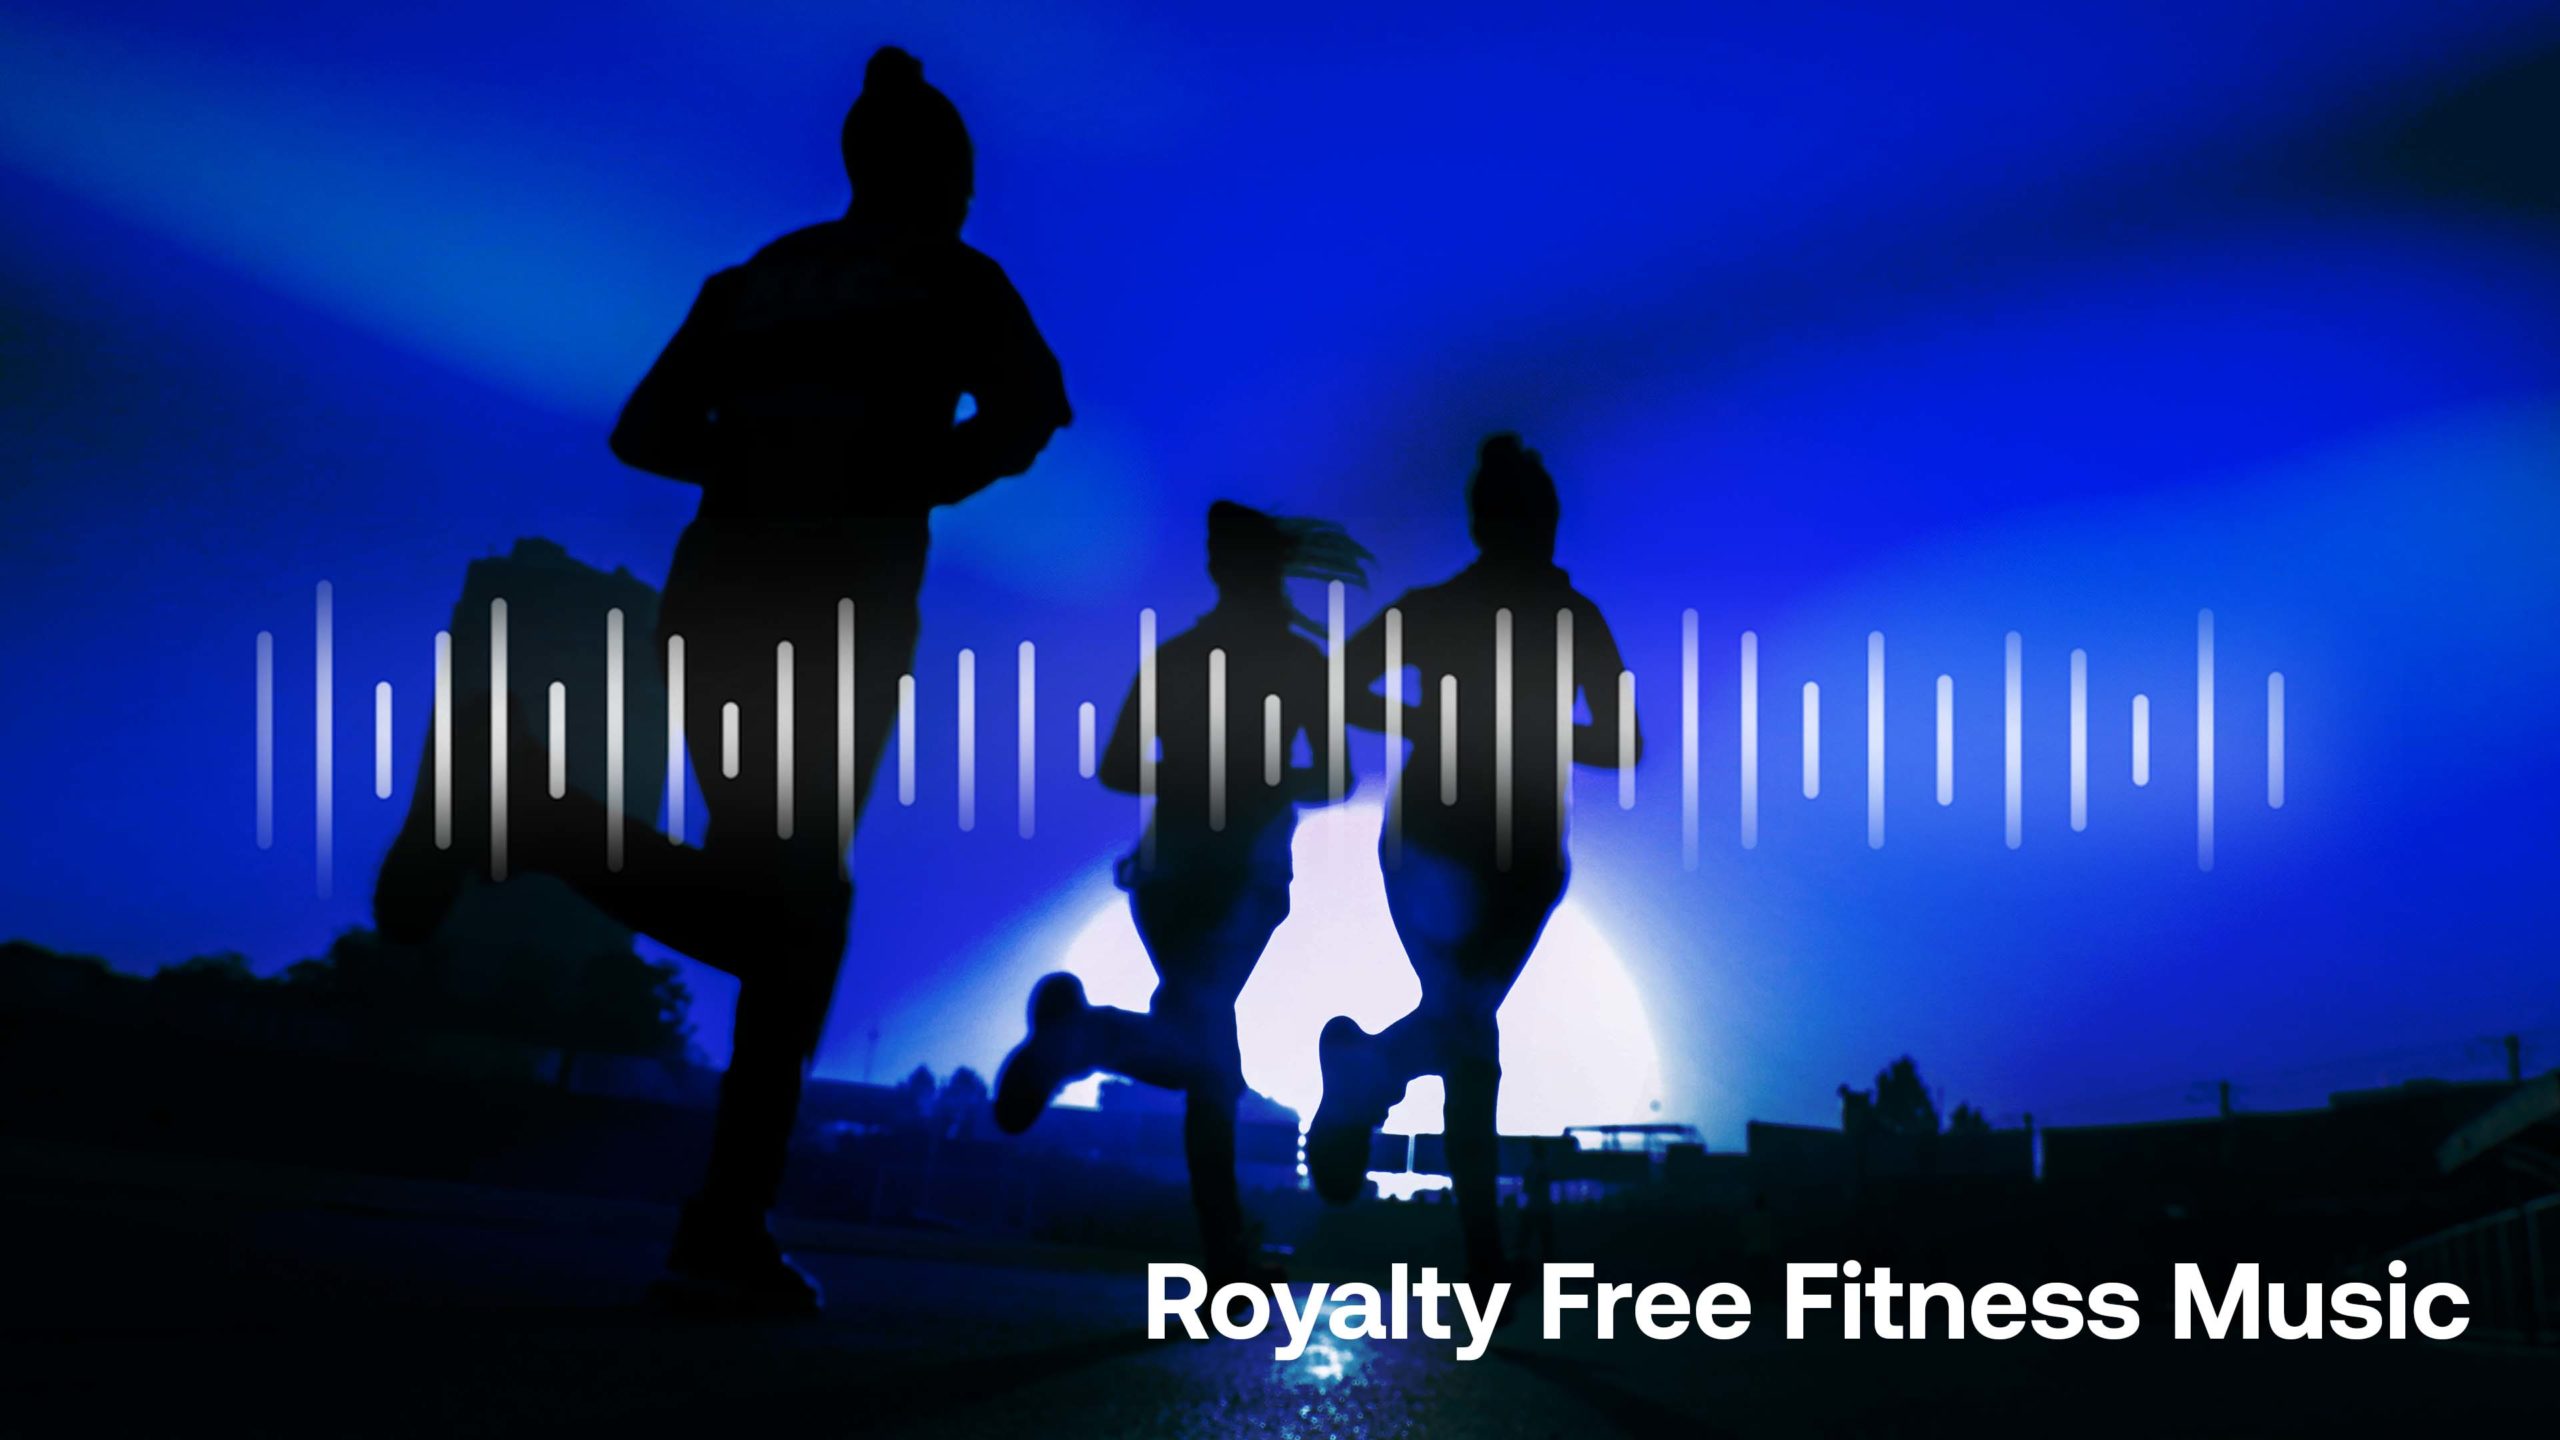 16 Workout Music Channels